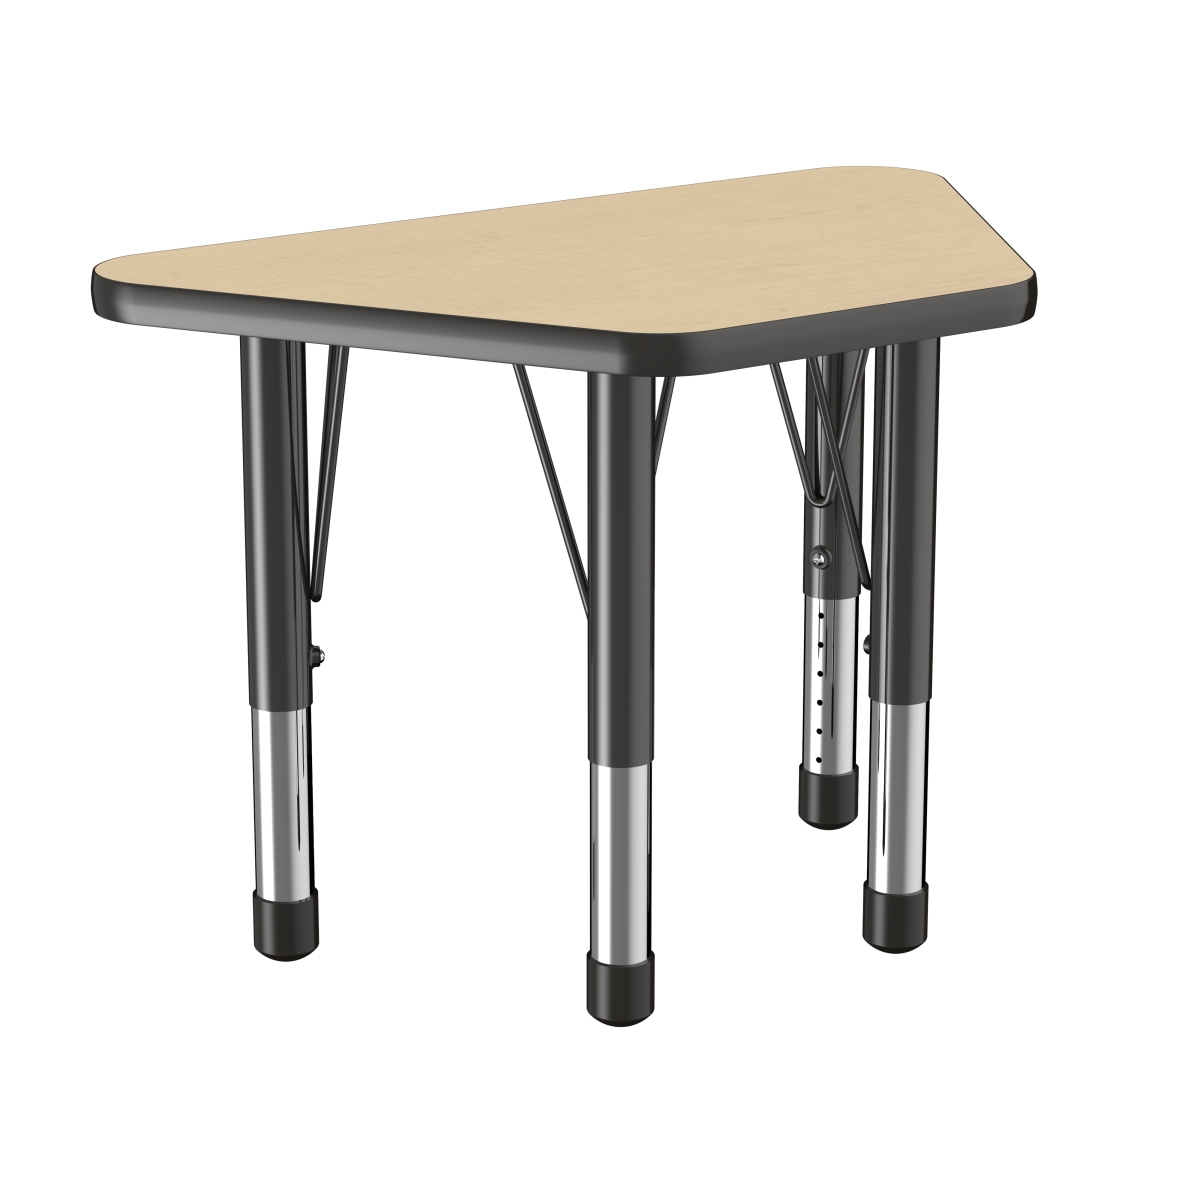 10065-mpbk 18 X 30 In. Trapezoid T-mold Adjustable Activity Table With Chunky Leg - Maple & Black